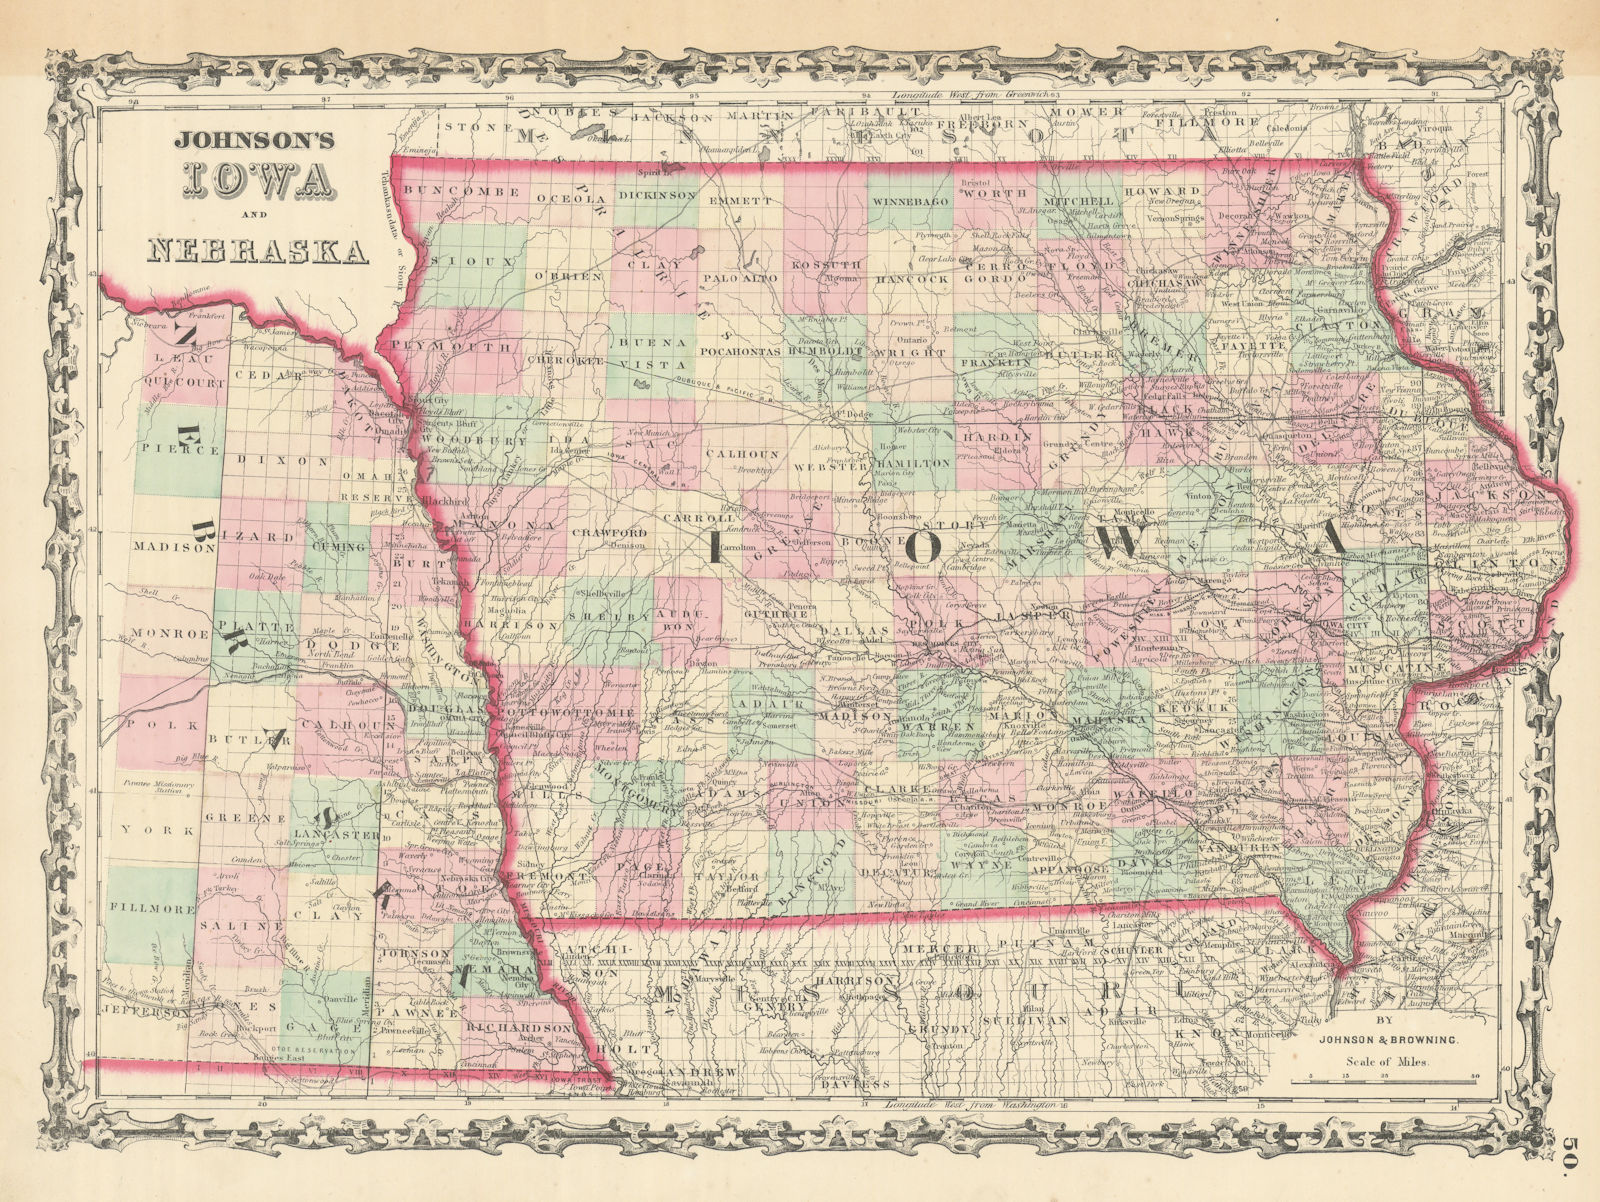 Johnson's Iowa & Nebraska. US state map showing counties 1861 old antique